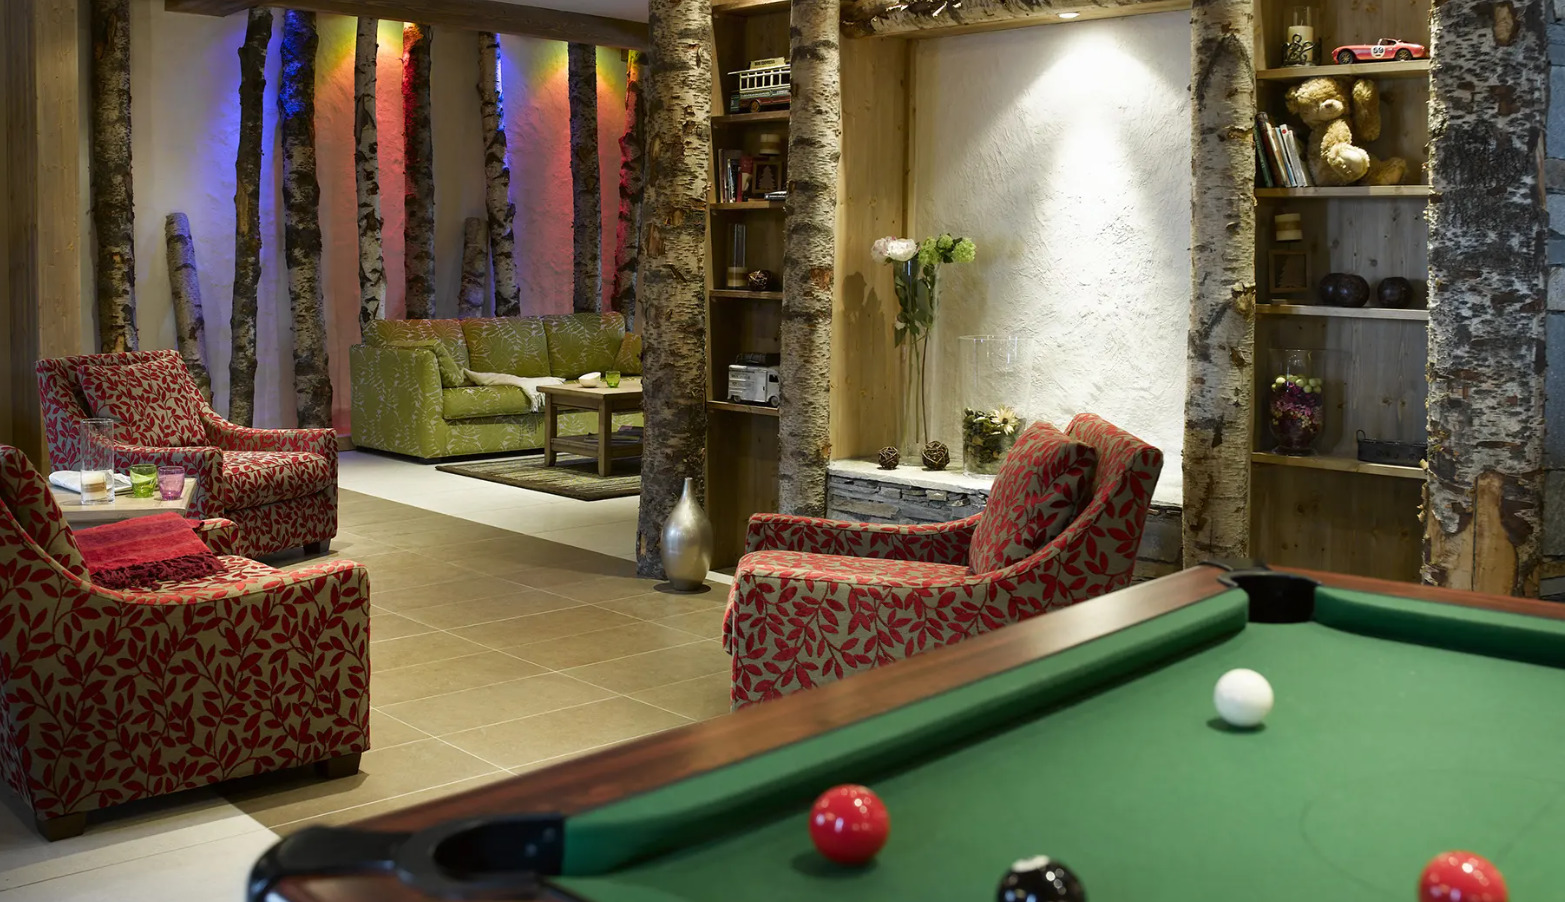 An image of the pool table in the reception